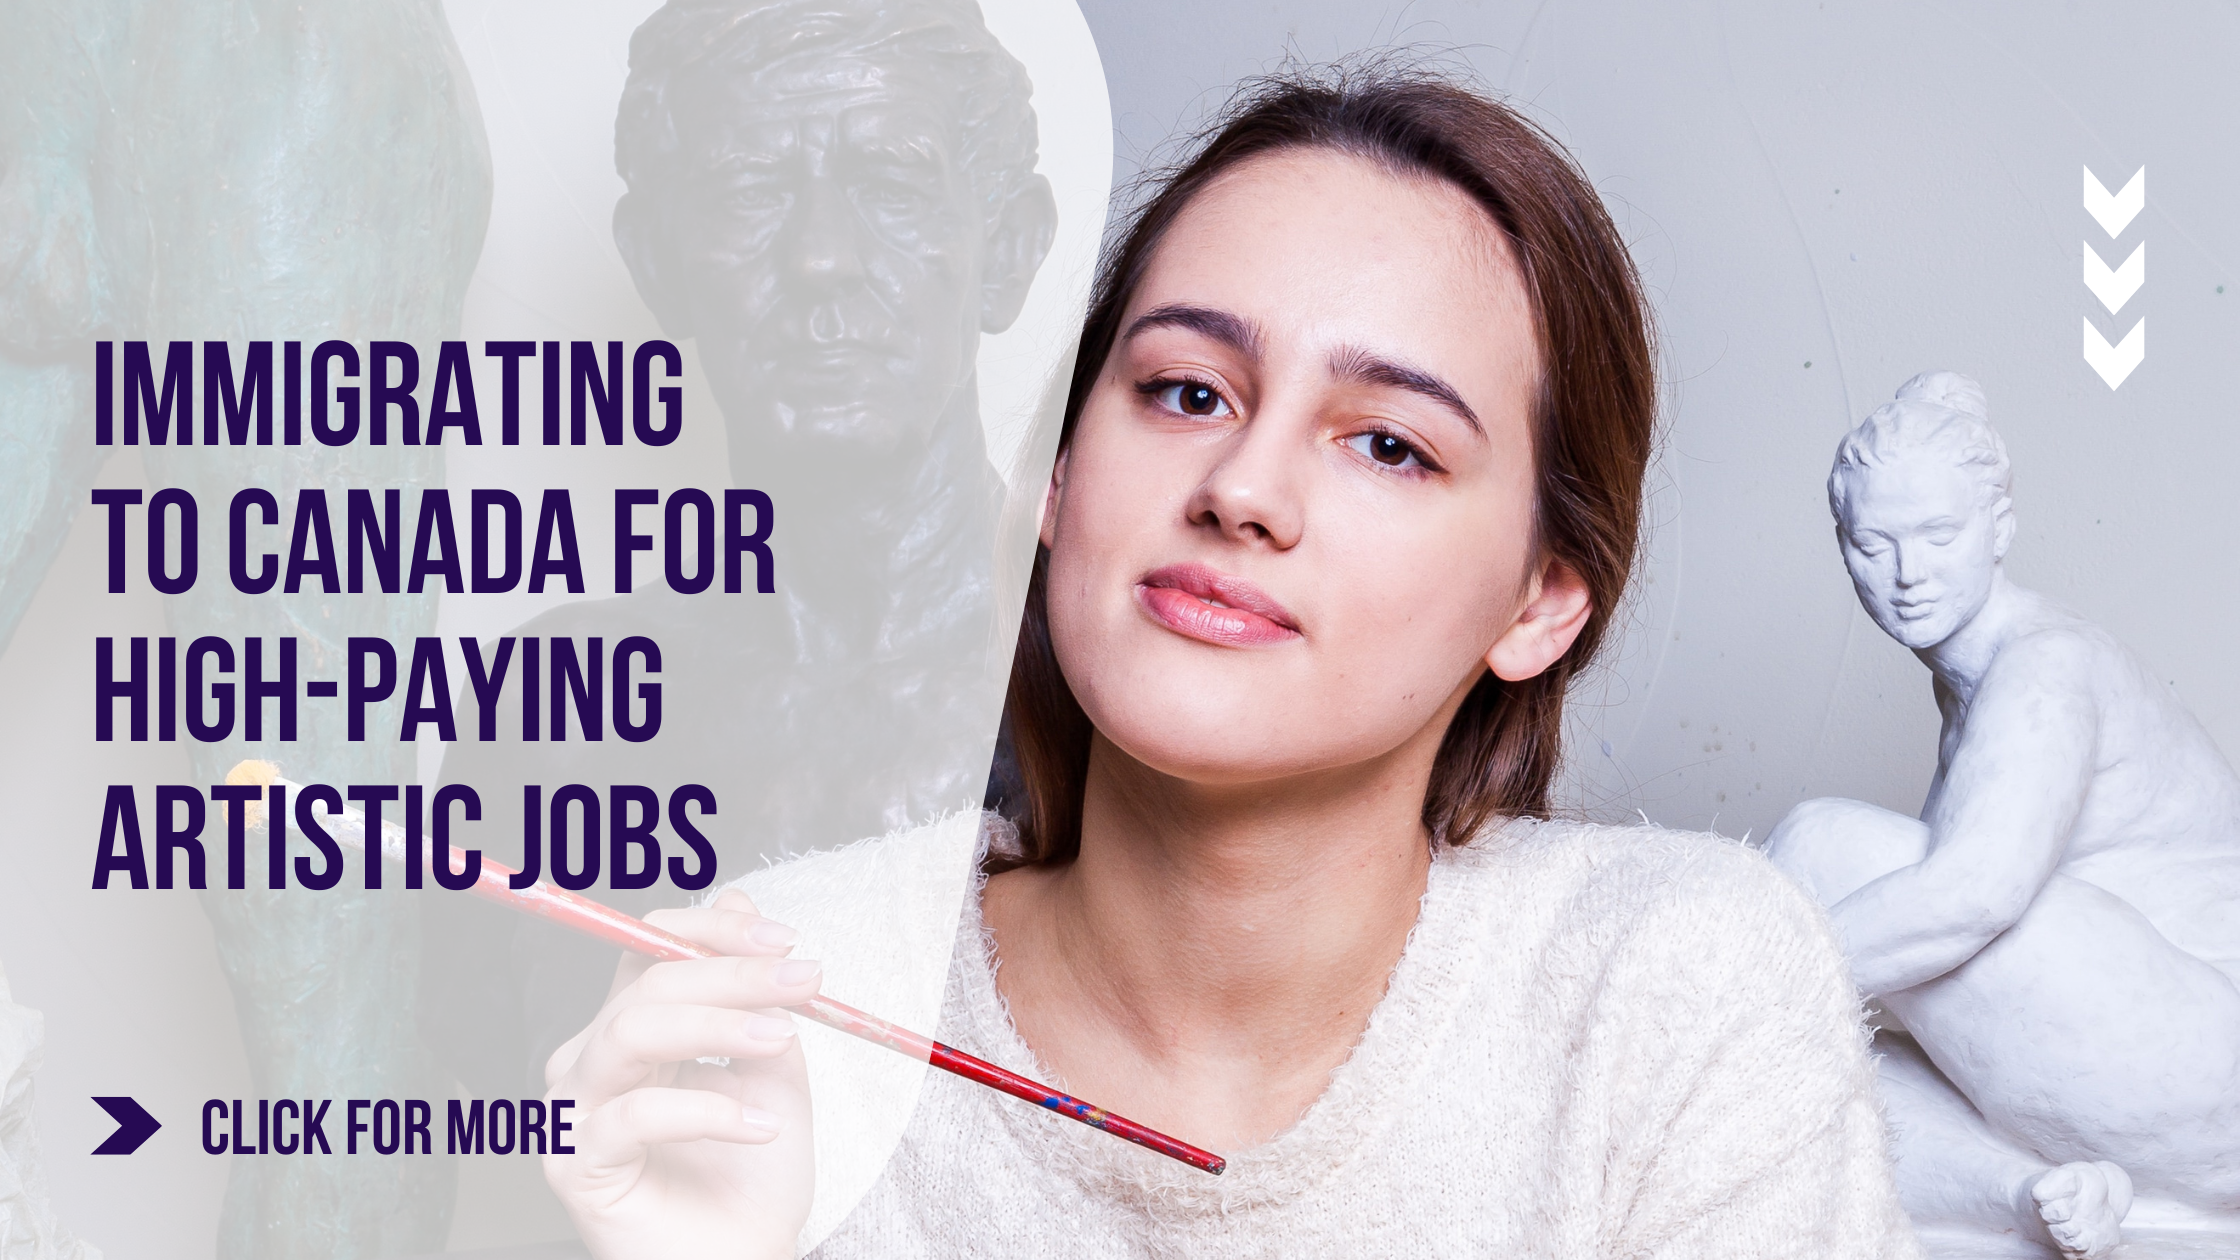 Why Immigrating to Canada for High-Paying Artistic Jobs Makes Sense